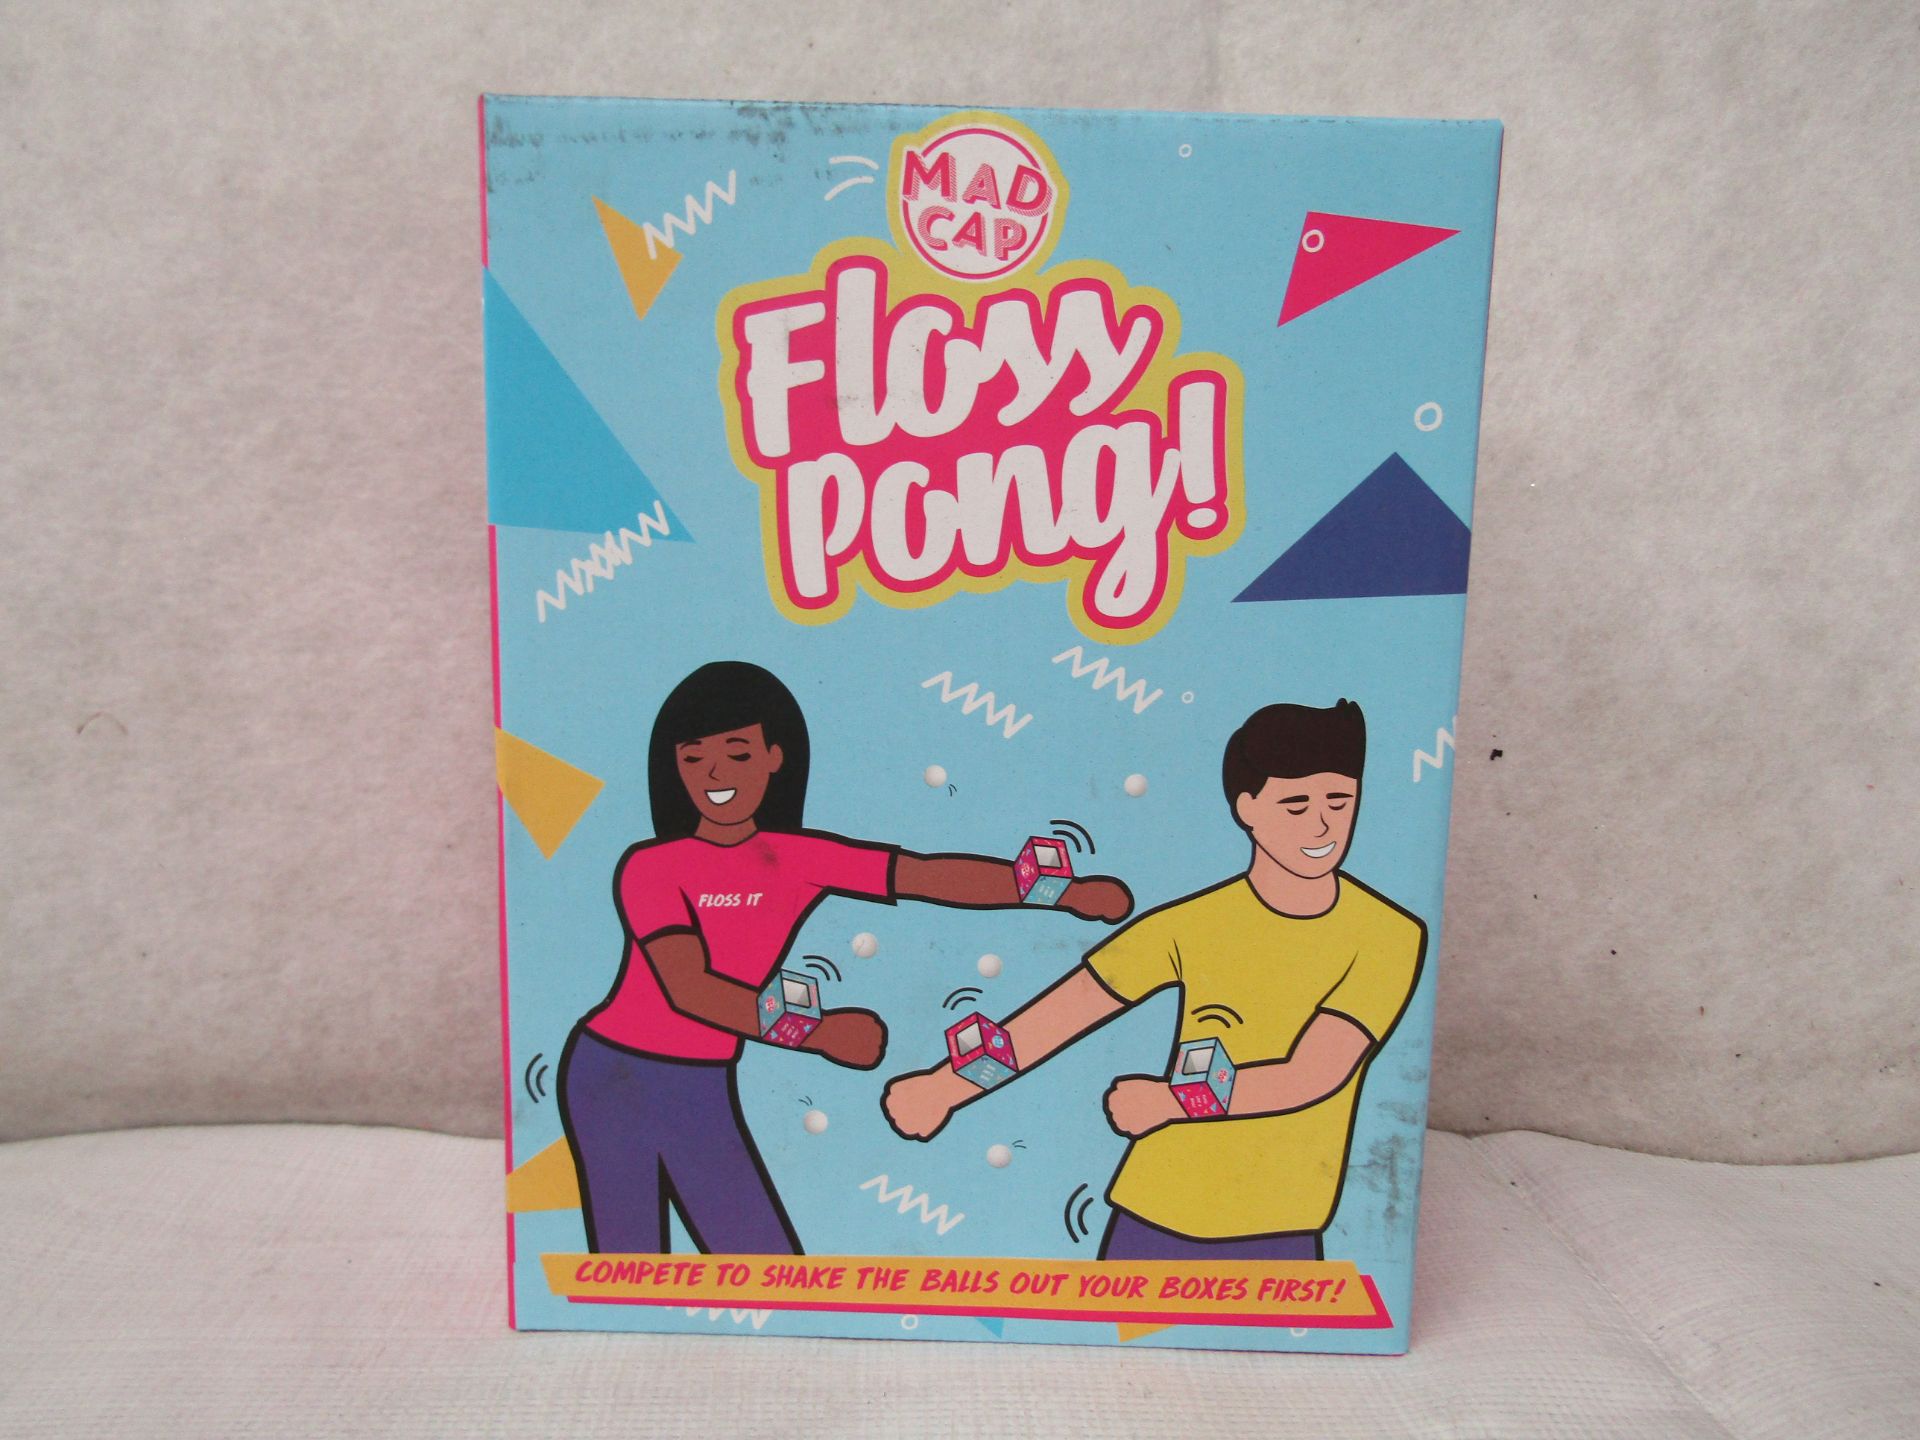 48X Madcap - Floss Pong Game - New & Boxed.